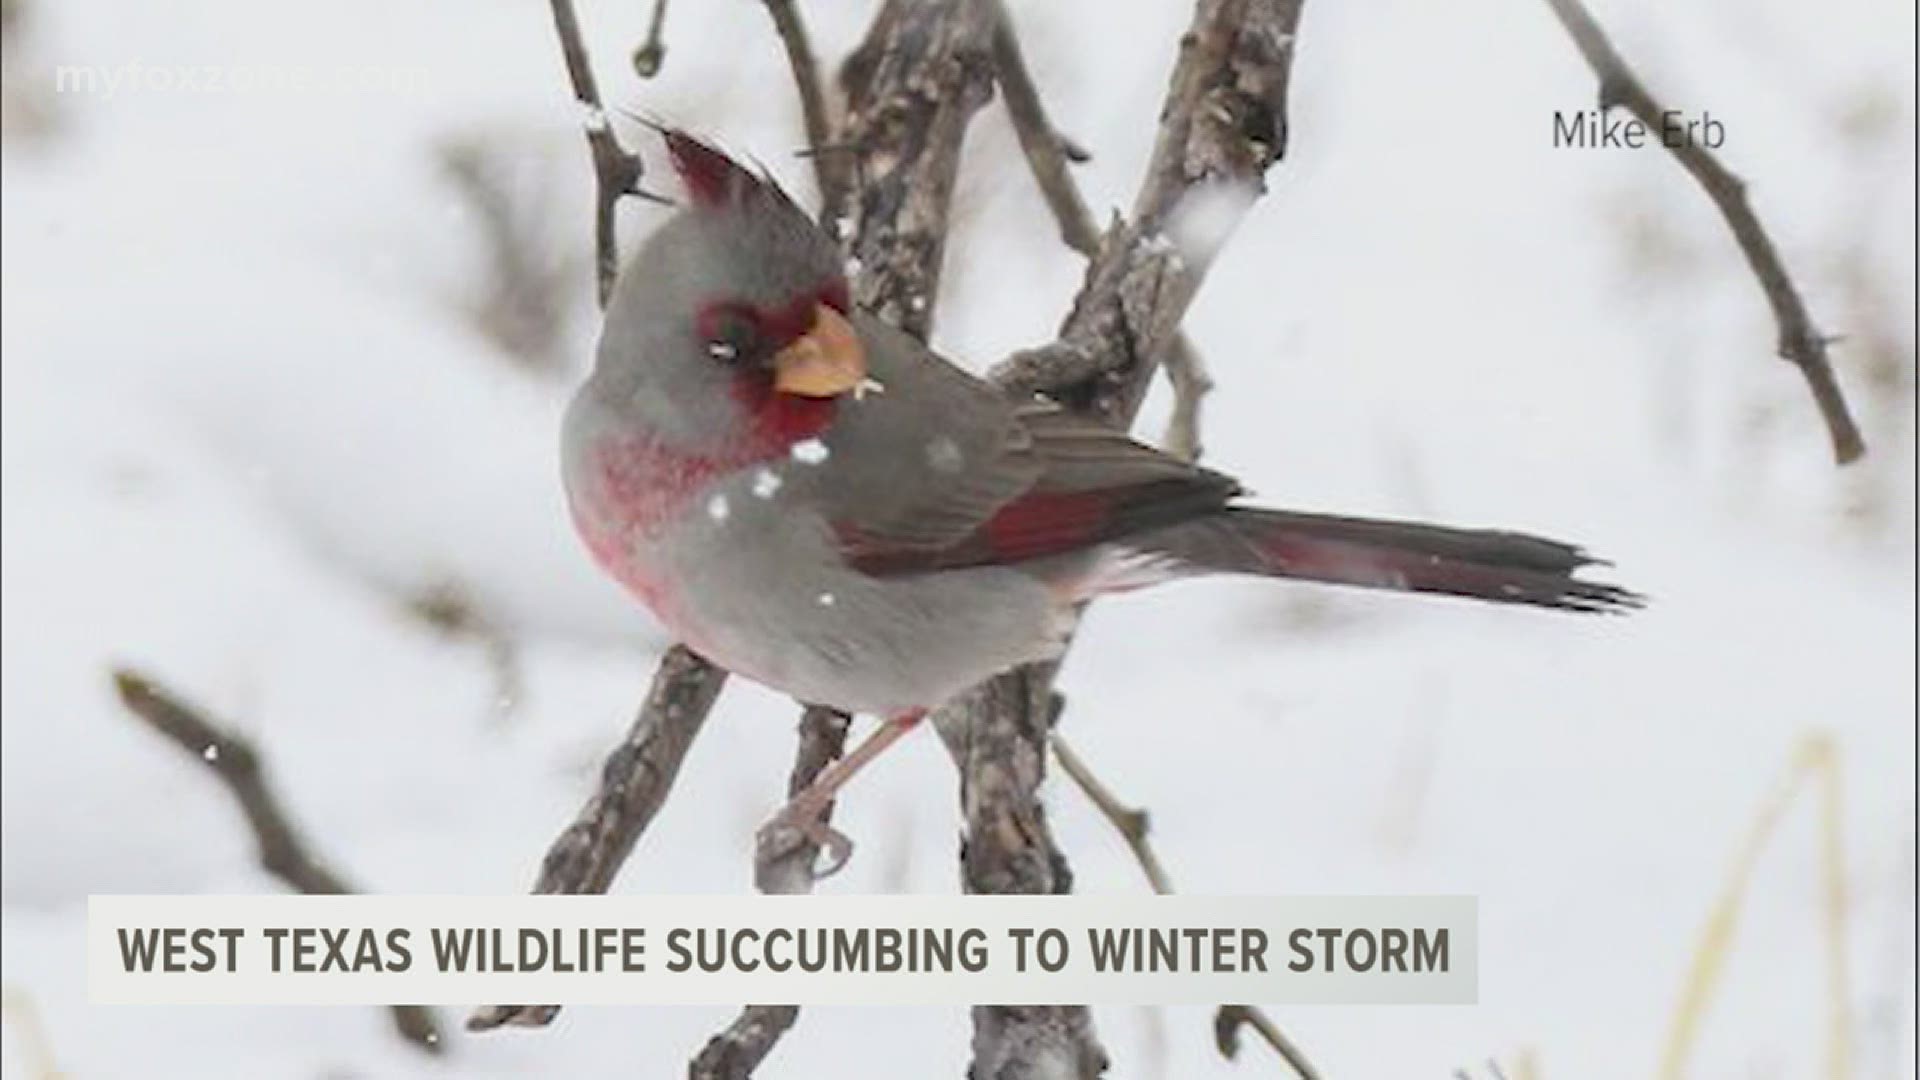 Last week’s winter storm was a nightmare for many Texans and even wildlife species. Wildlife experts are now seeing which species were hit the hardest.